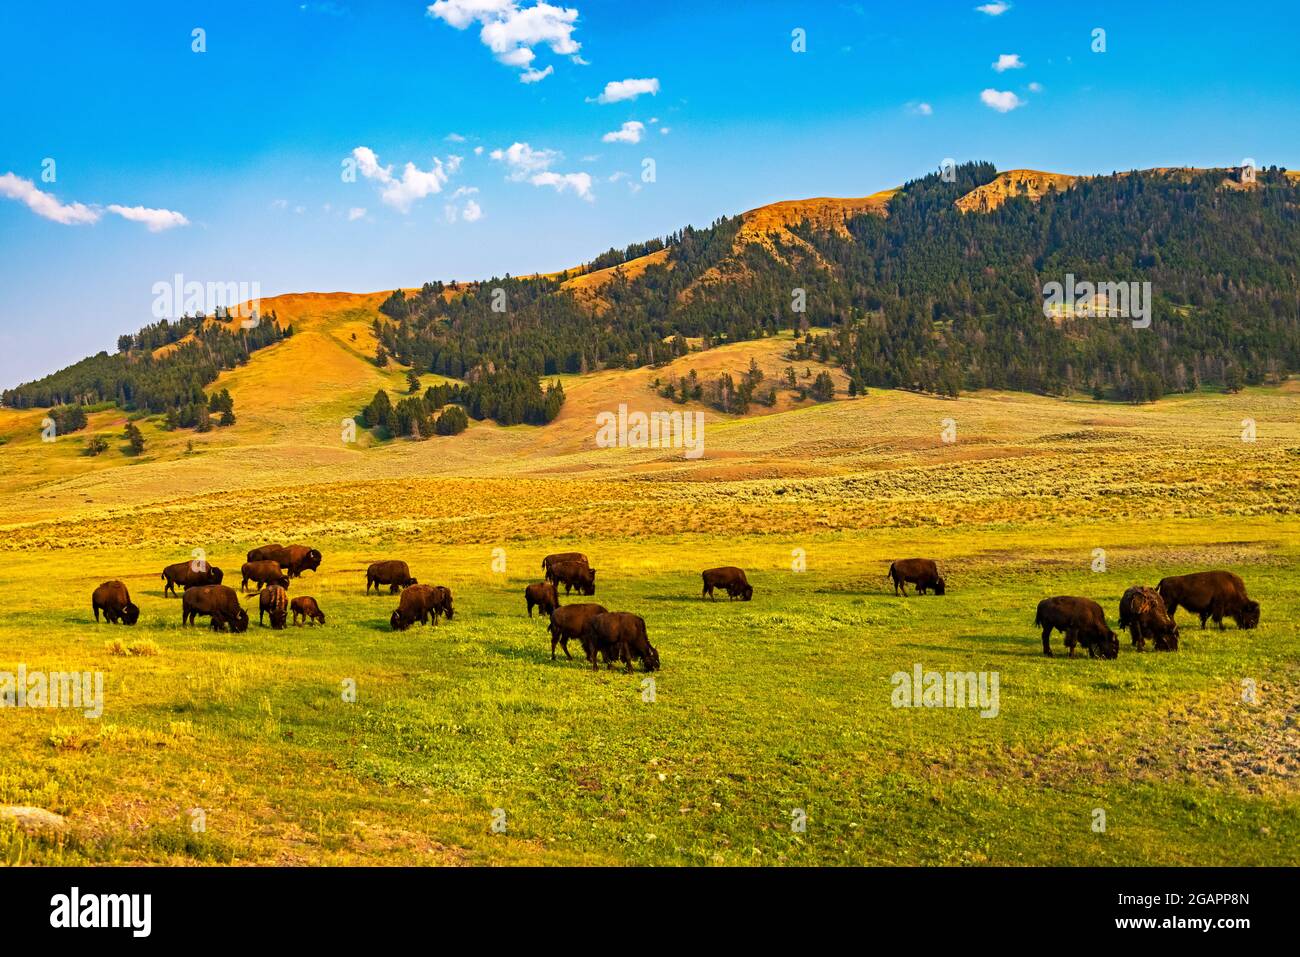 A herd of American Bison (Bison bison) grazes in the spectacular Lamar Valley area in the northeastern part of Yellowstone National Park, Wyoming, USA. Stock Photo